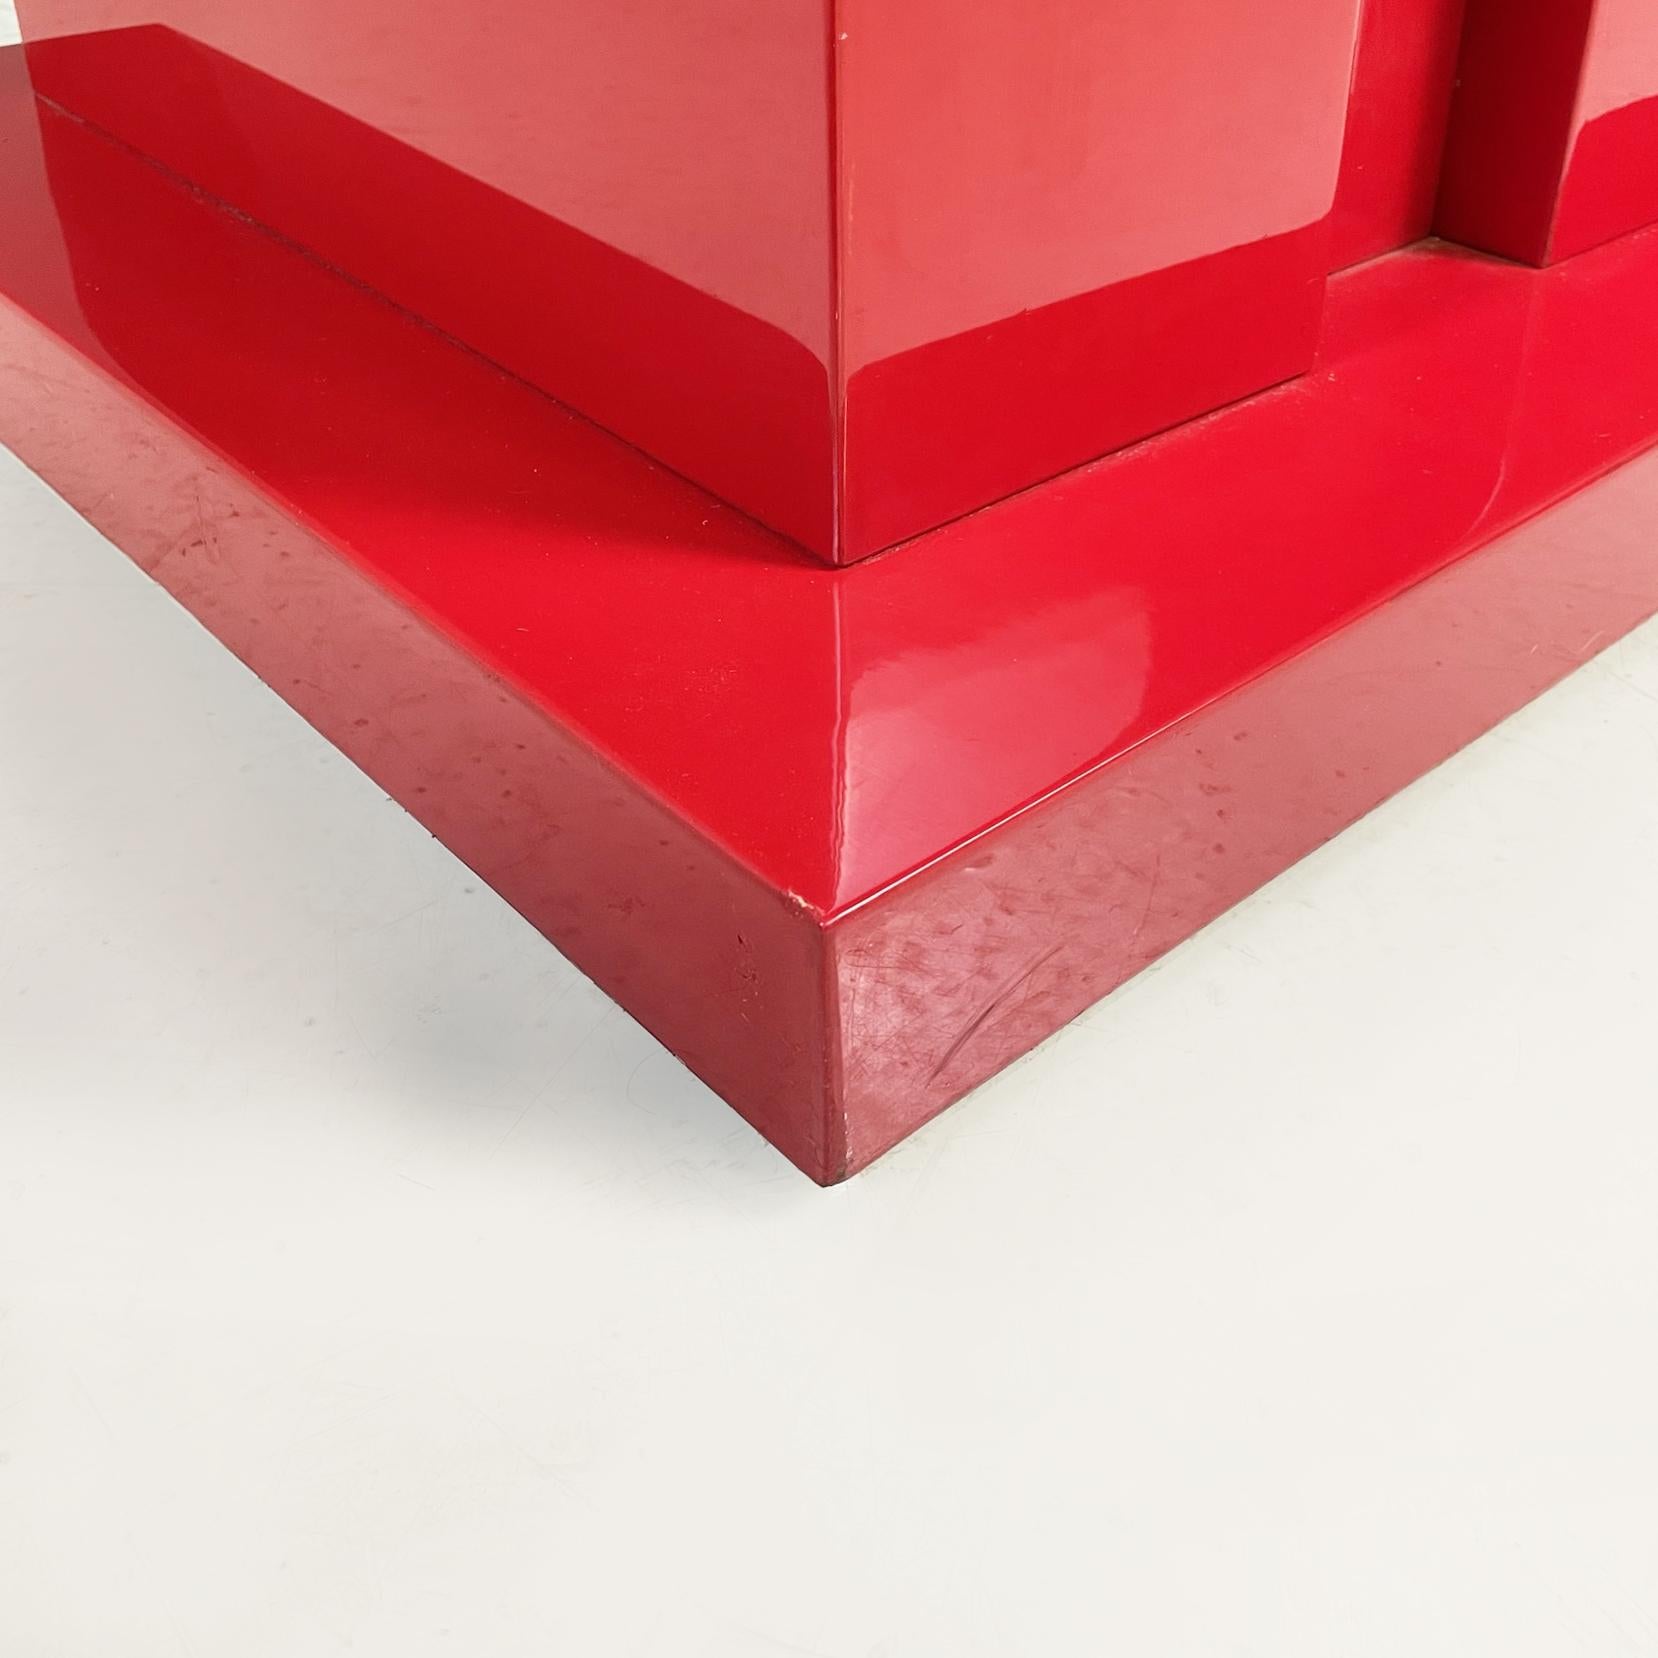 Italian Midcentury Geometric Pedestal in Red Lacquered Wood, 1980s For Sale 5